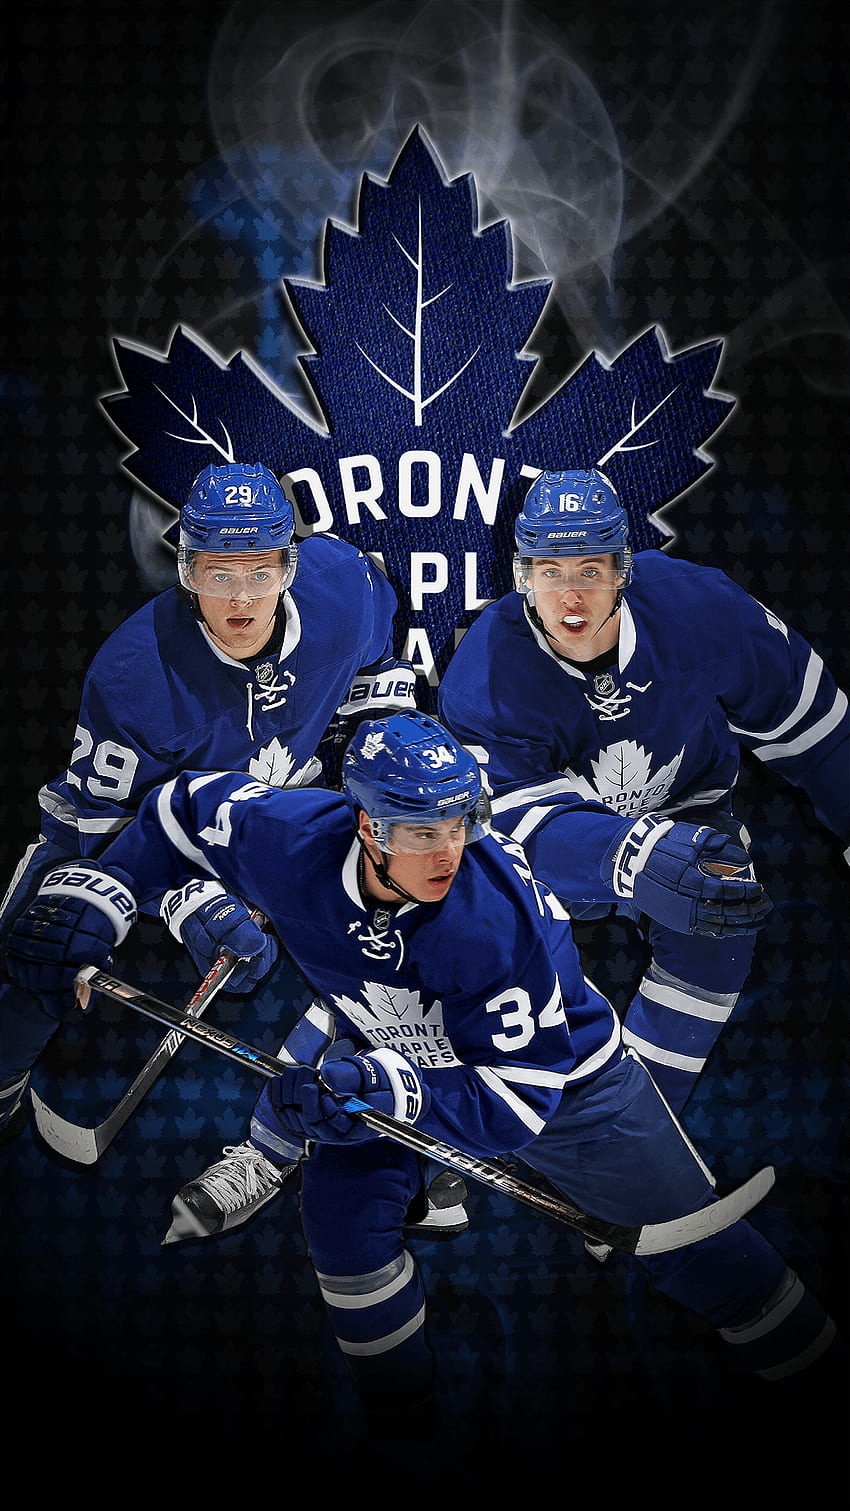 50 Toronto Maple Leafs HD Wallpapers and Backgrounds